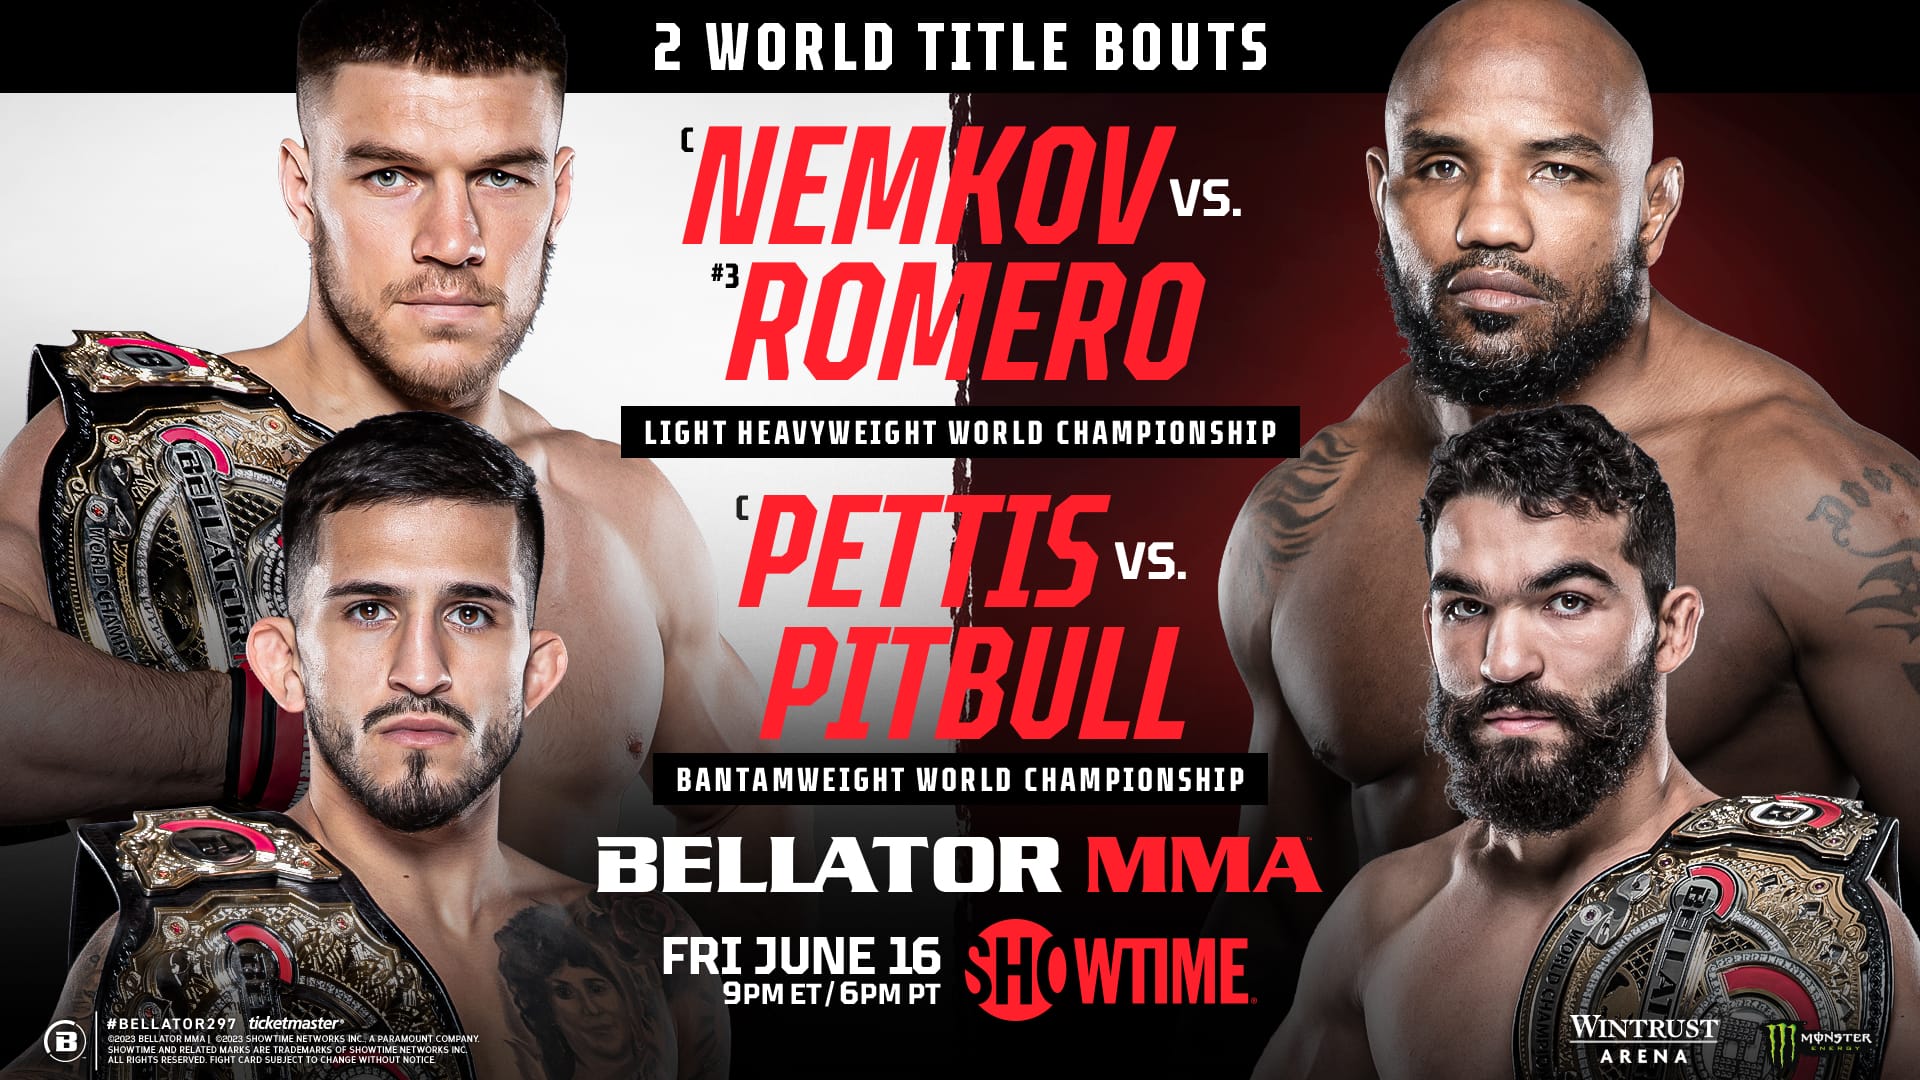 How to Watch Bellator 297 online for free